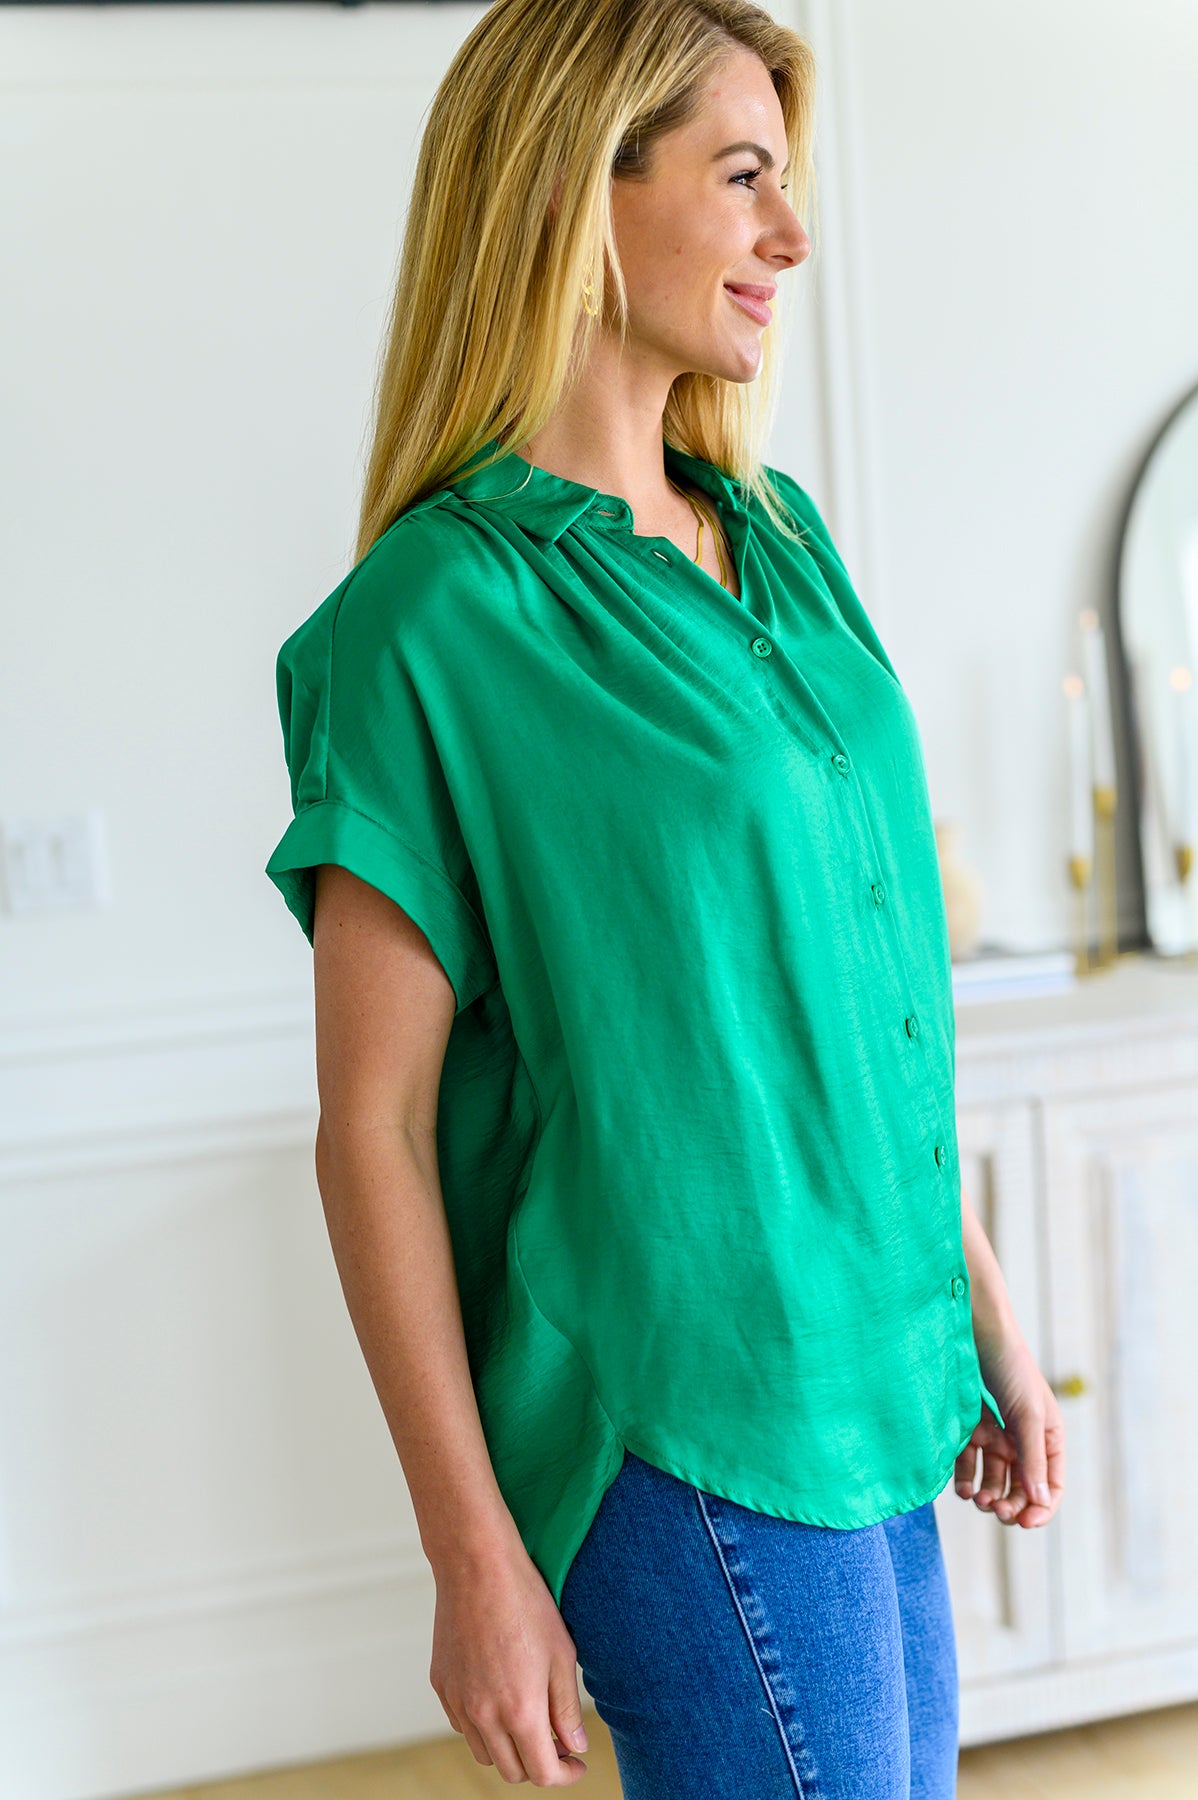 Working On Me Top in Kelly Green - 5/4/2023